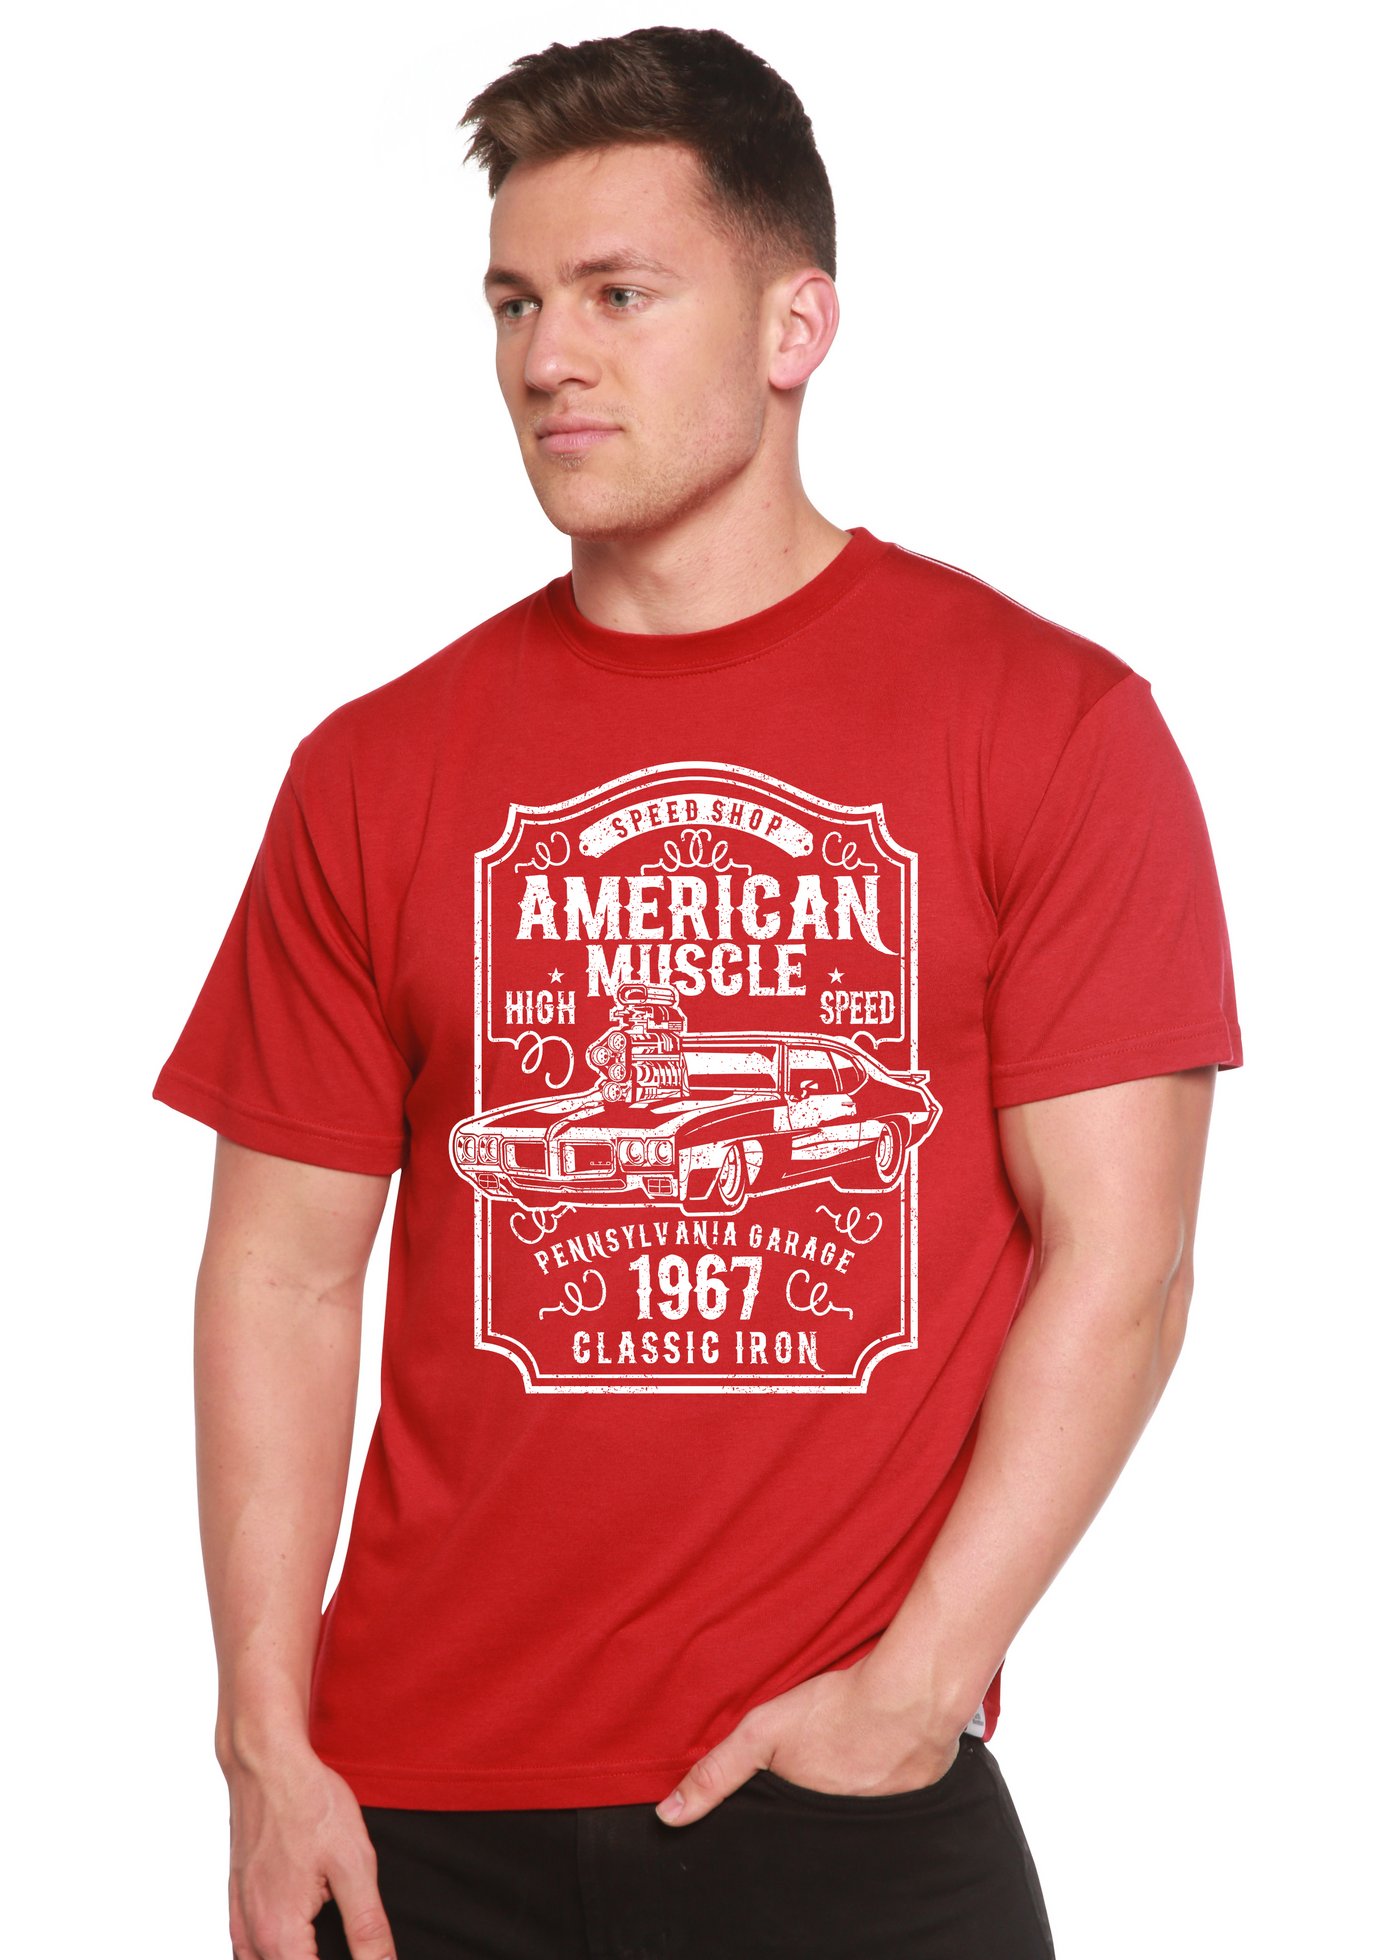 American Muscle men's bamboo tshirt pompeian red